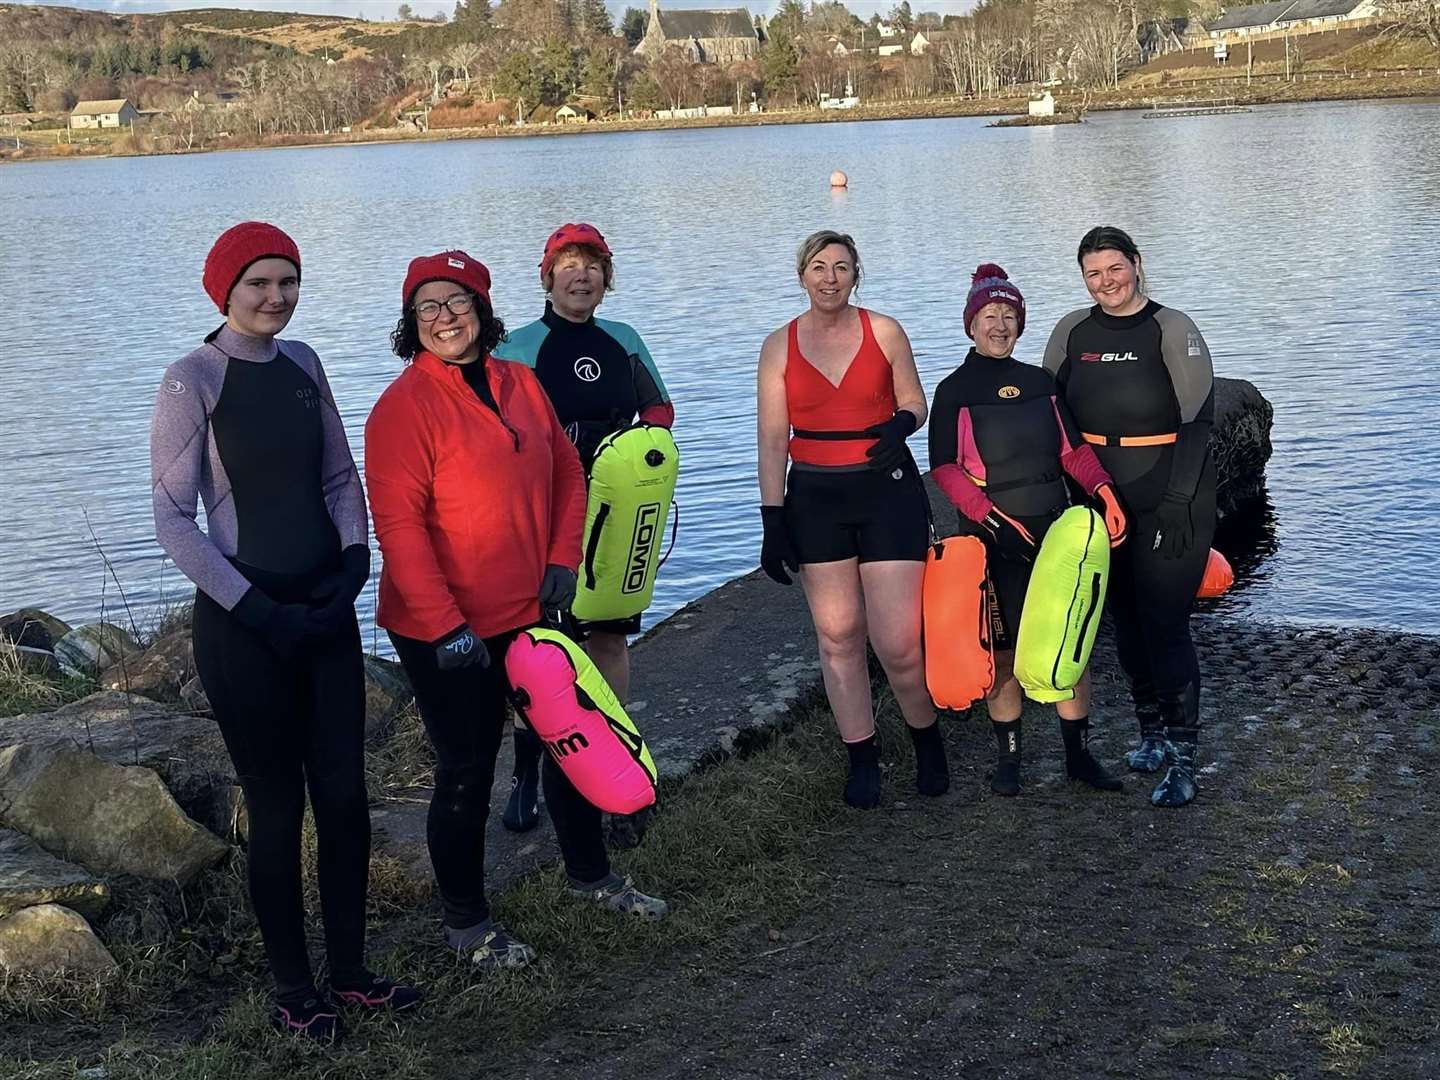 Loch Shin Swimmers have so far raised over £340 towards their Red Nose Day total.